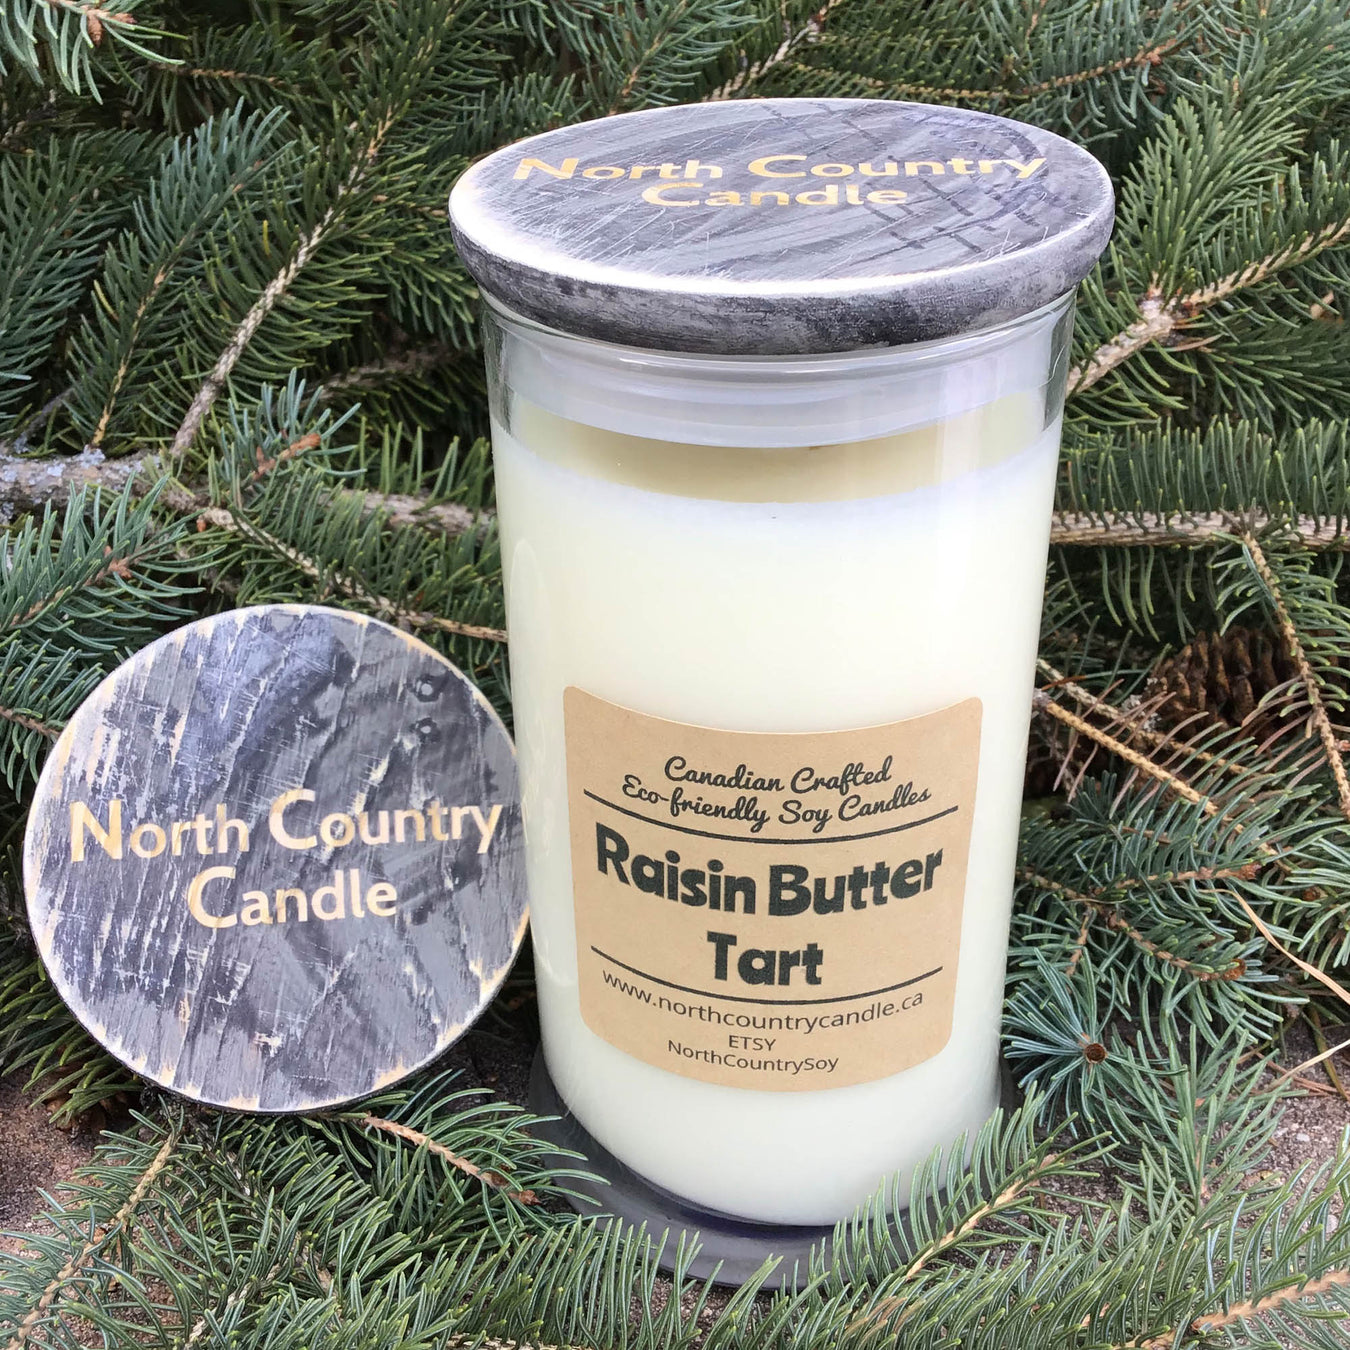 North Country Candle | Artfest Ontario